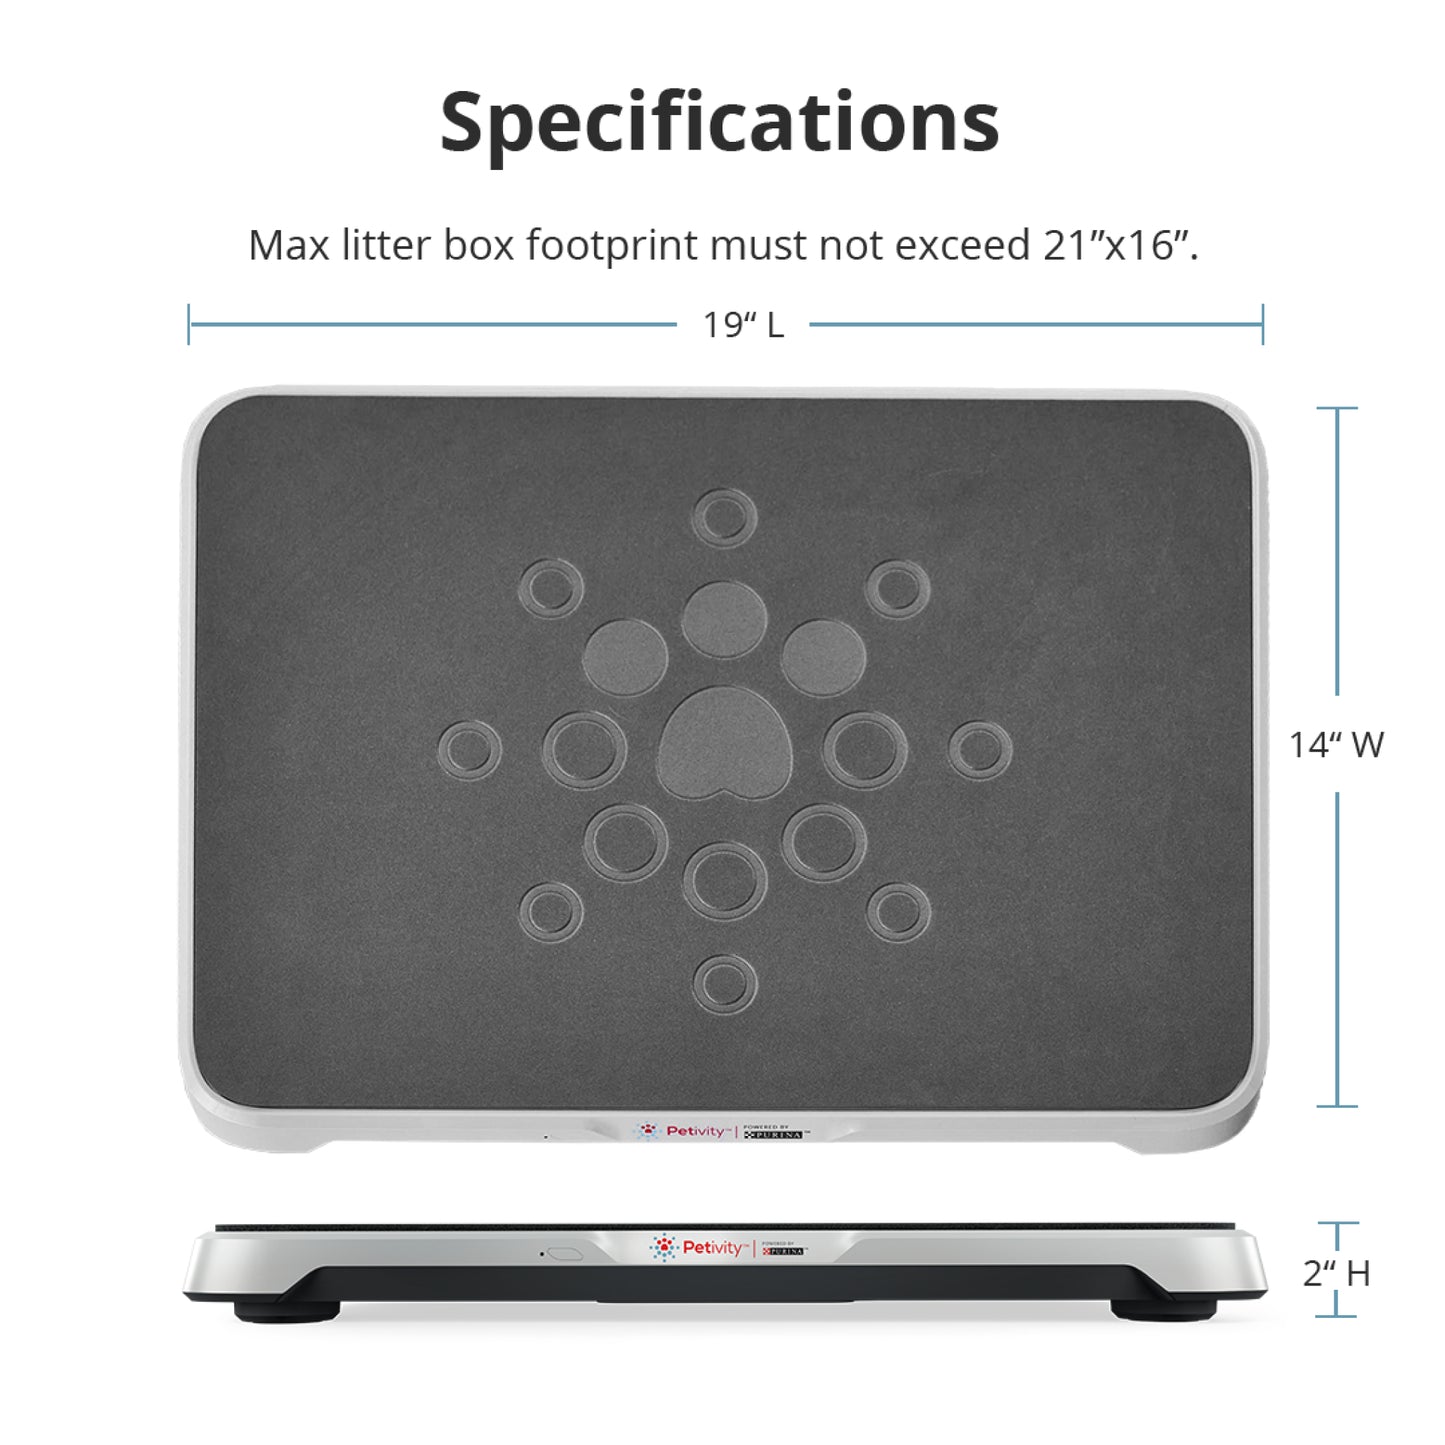 Specifications | Max litterbox footprint must not exceed 21"x16"